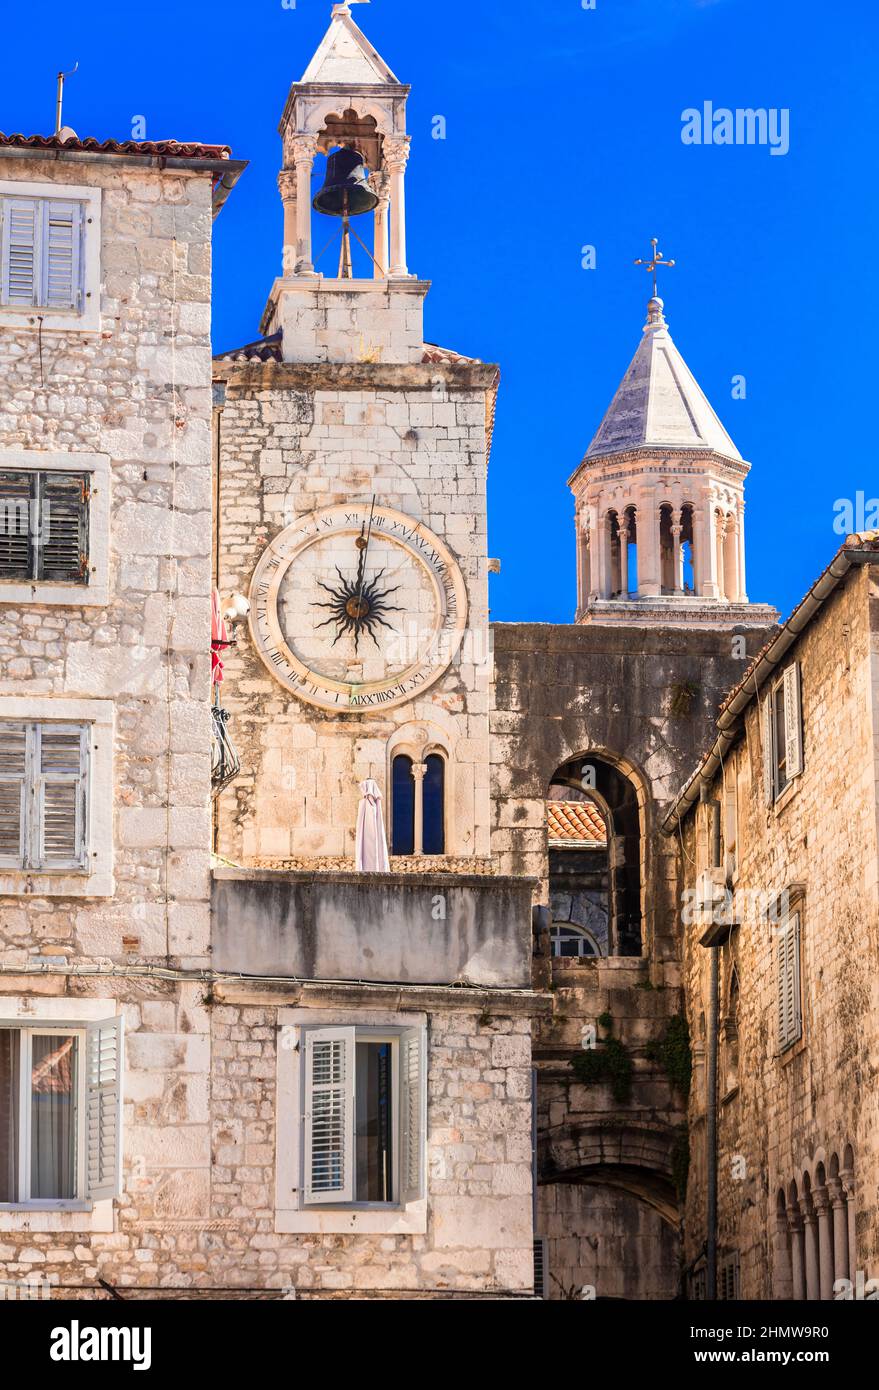 Croatia travel and landmarks. Split -ancient roman well preserved city. View of tower with clocks in downtown Stock Photo